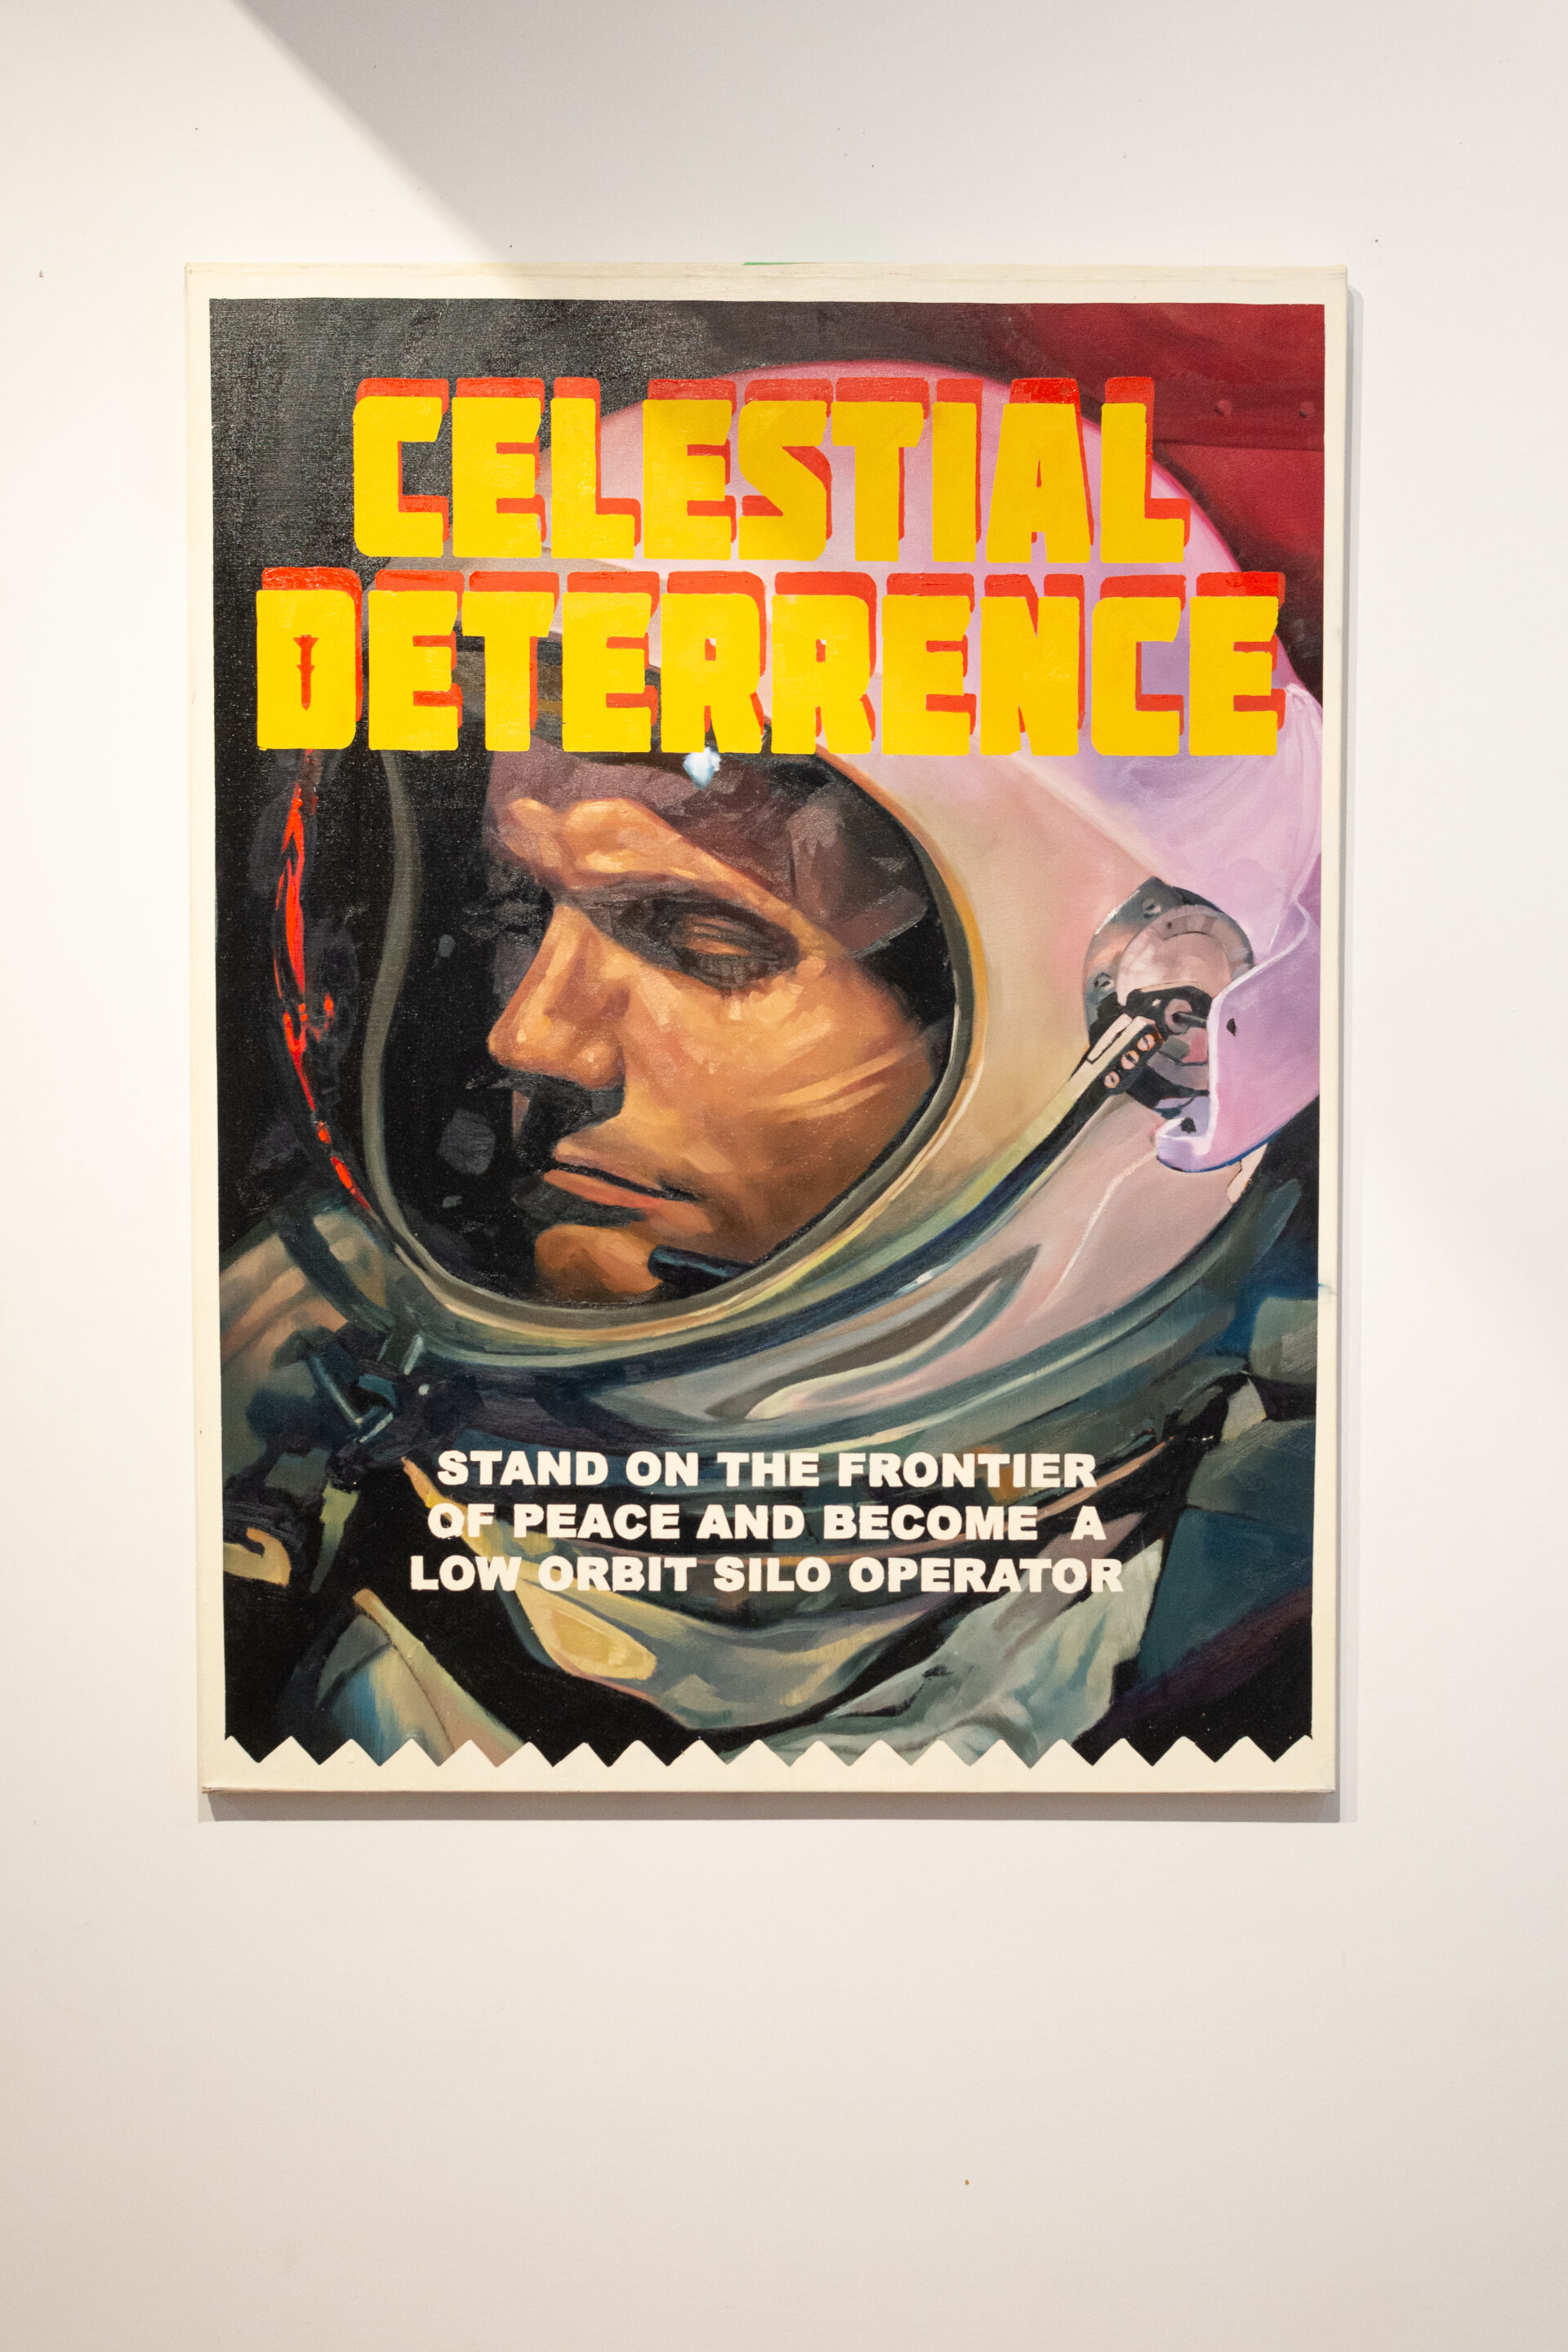 image of a painting by whit montgomery with a man in a helmet and the words "celestial deterrence"